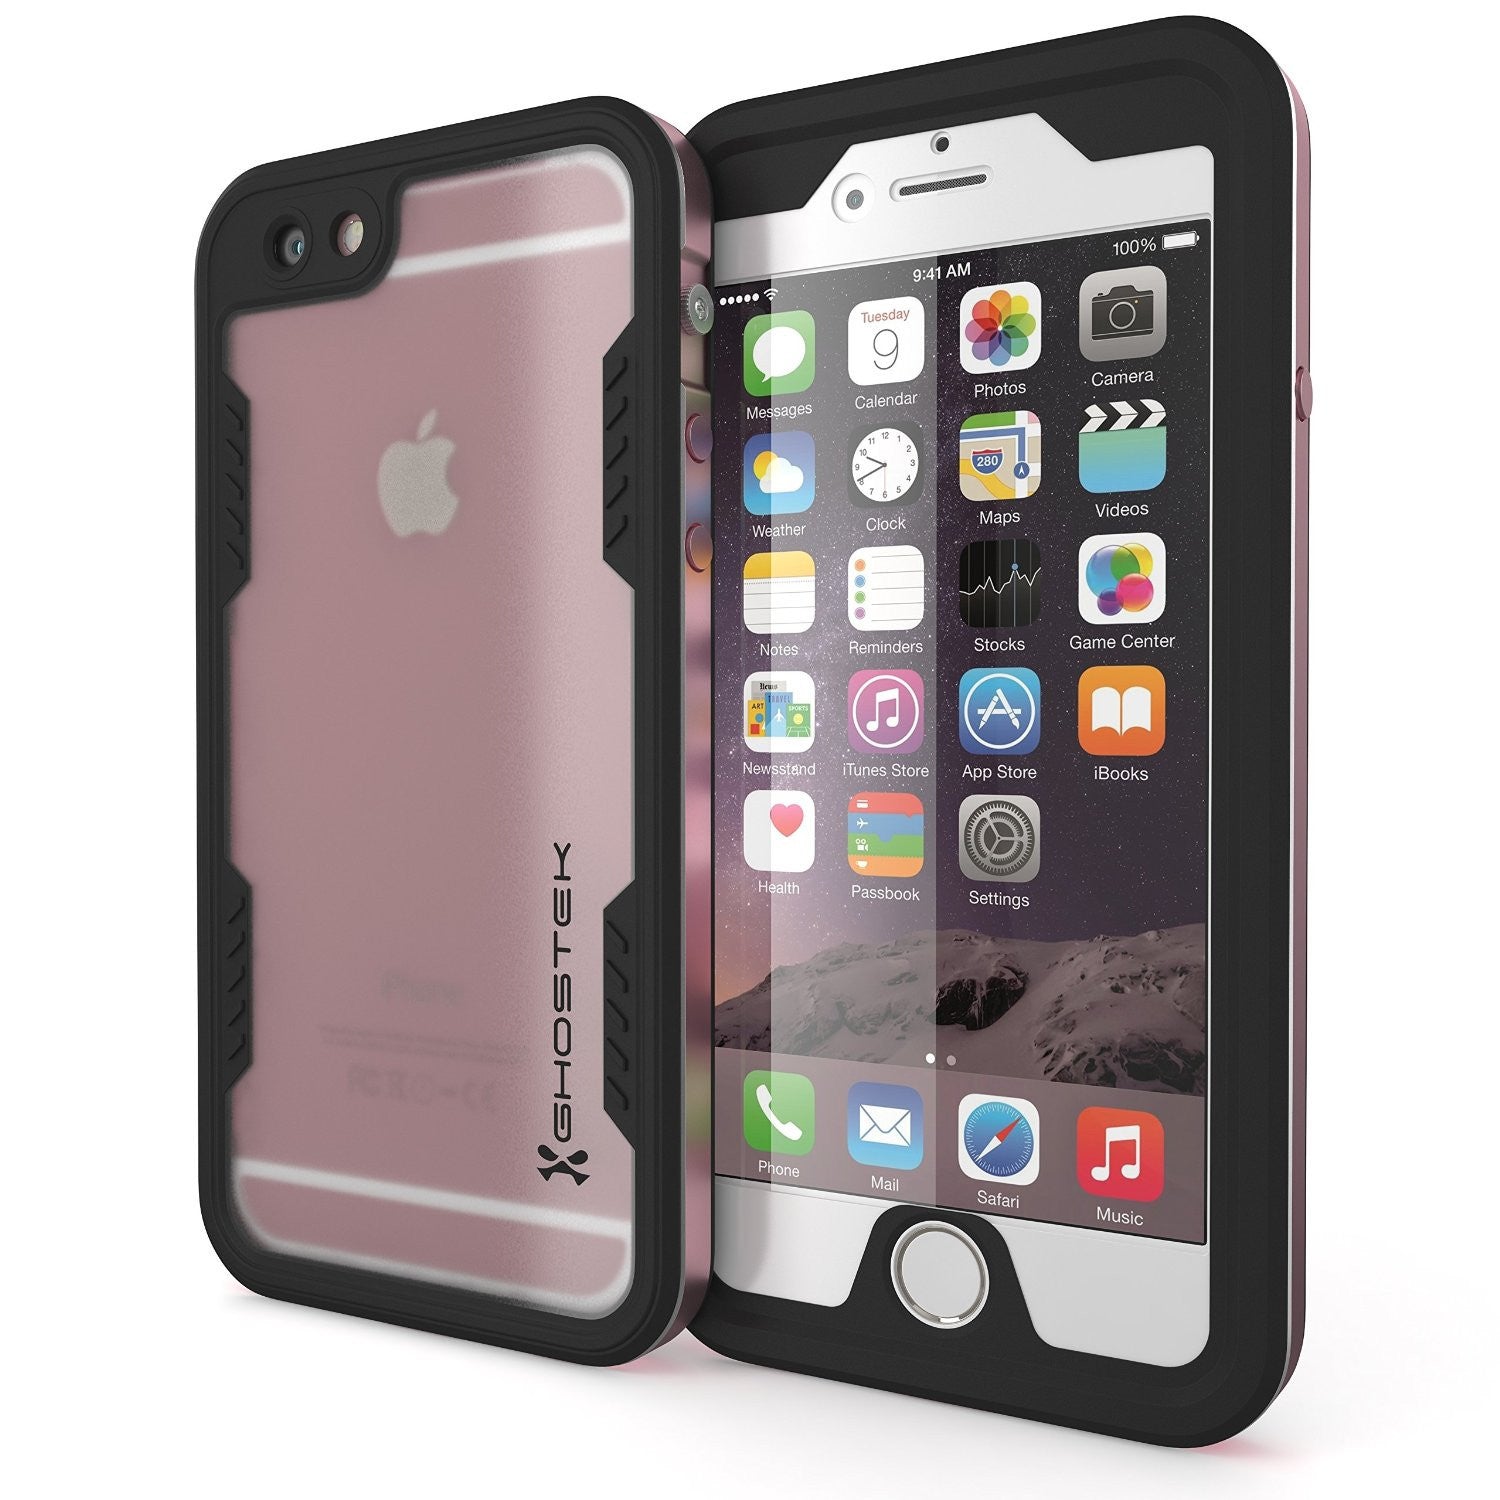 iPhone 6/6S Waterproof Case, Ghostek Atomic 2.0 Space Pink W/ Attached Screen Protector, Slim Fitted (Color in image: pink)